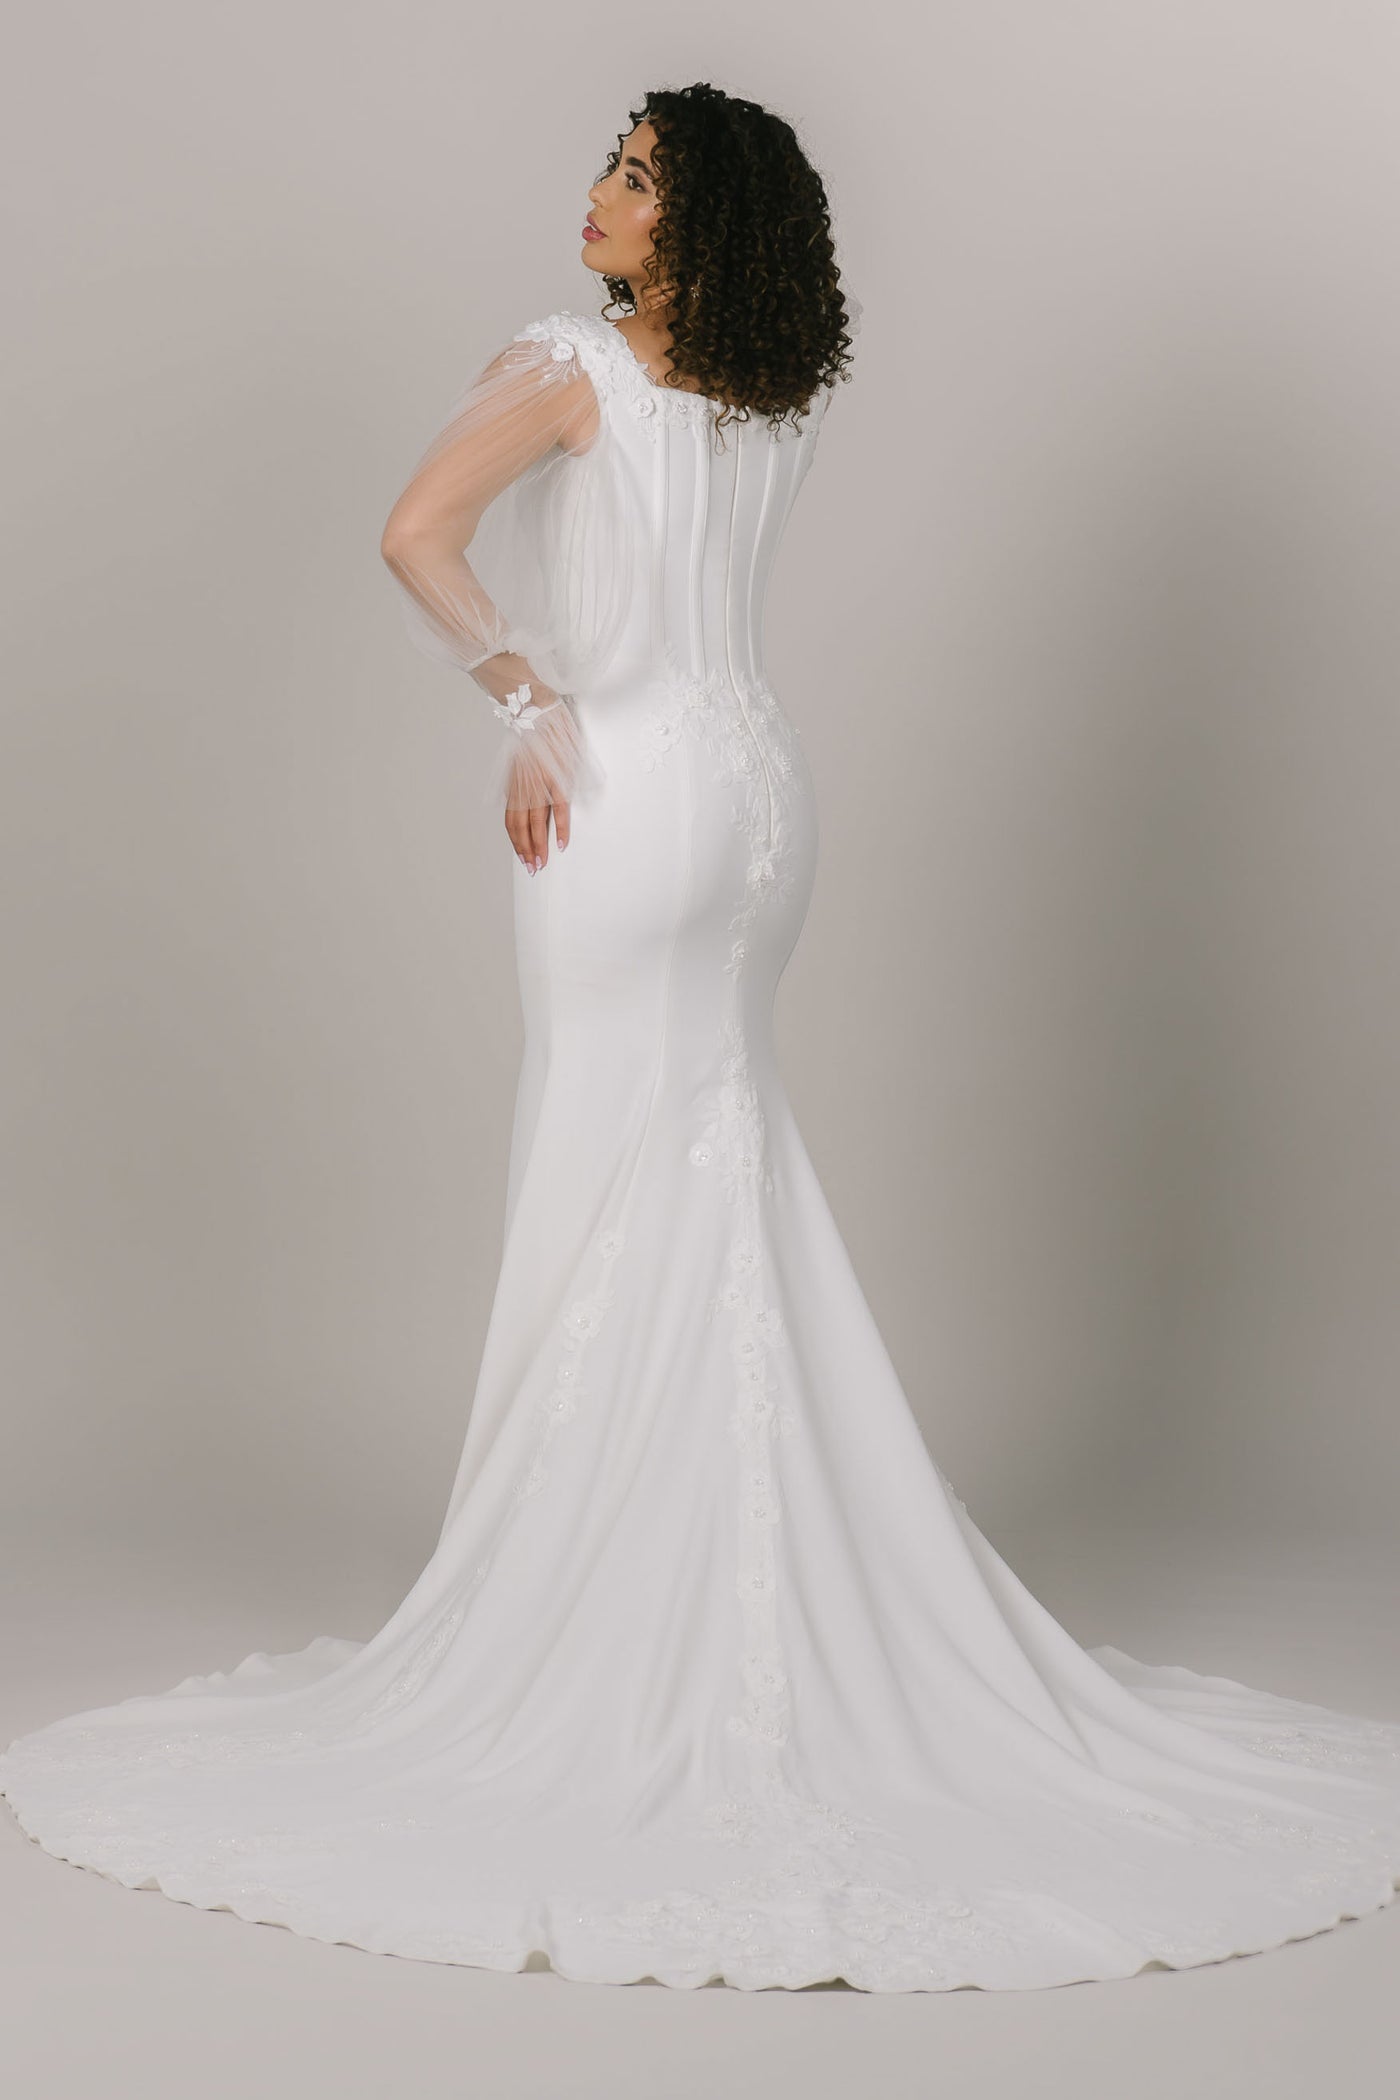 This is a back shot of a modest wedding dress with boning n the bodice and a long intricate train.